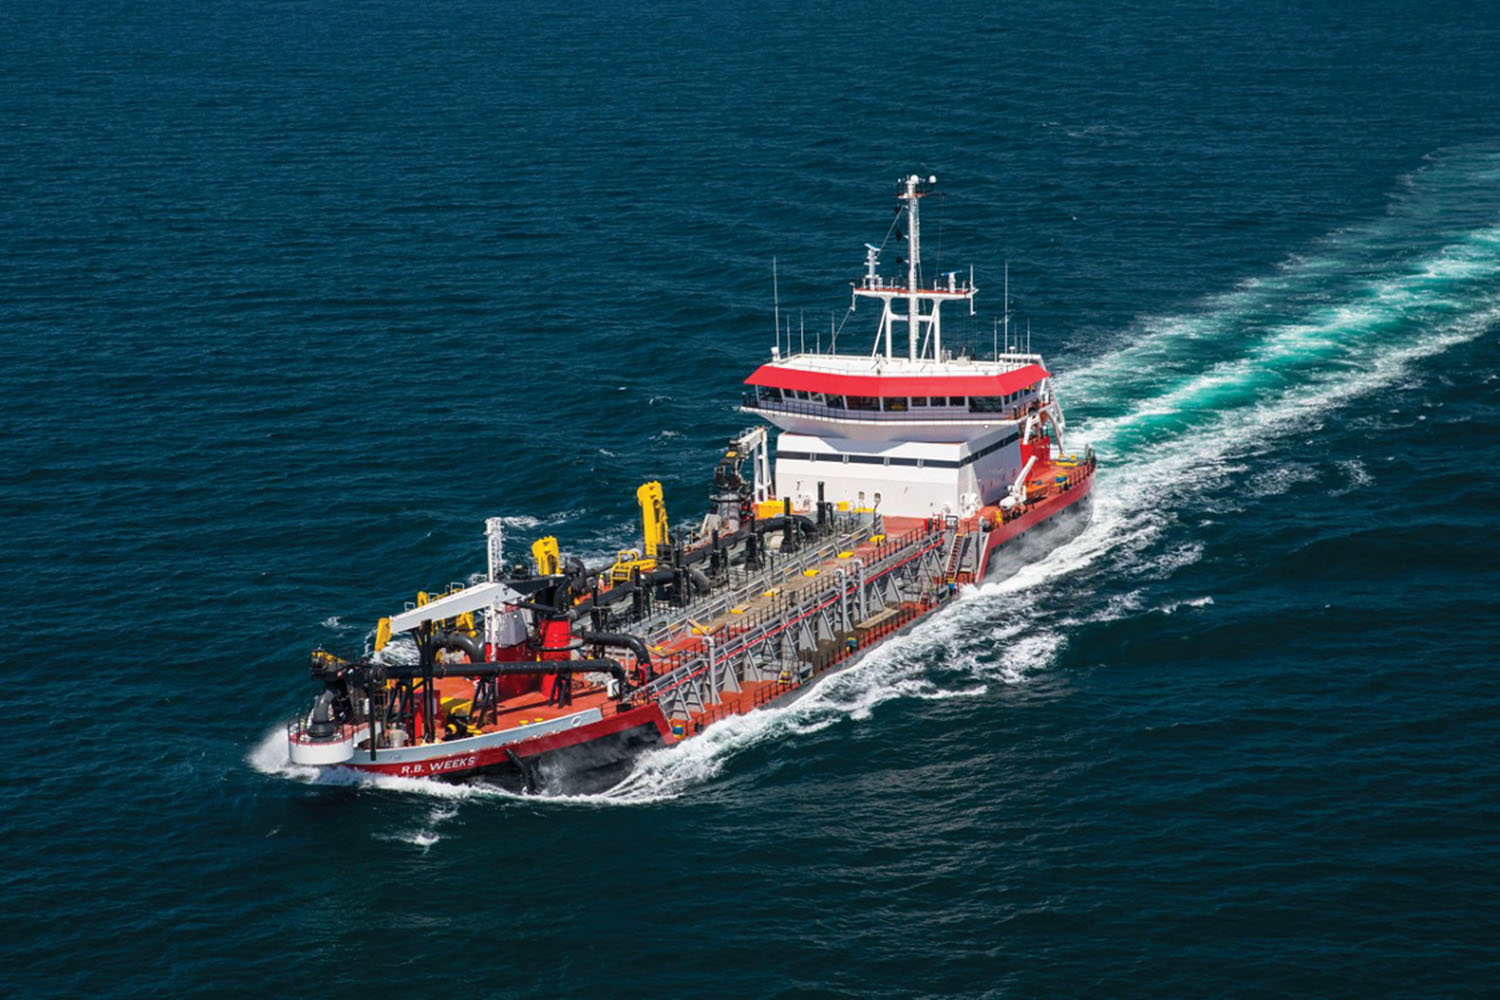 Eastern Conducts Sea Trials For New Weeks Dredge